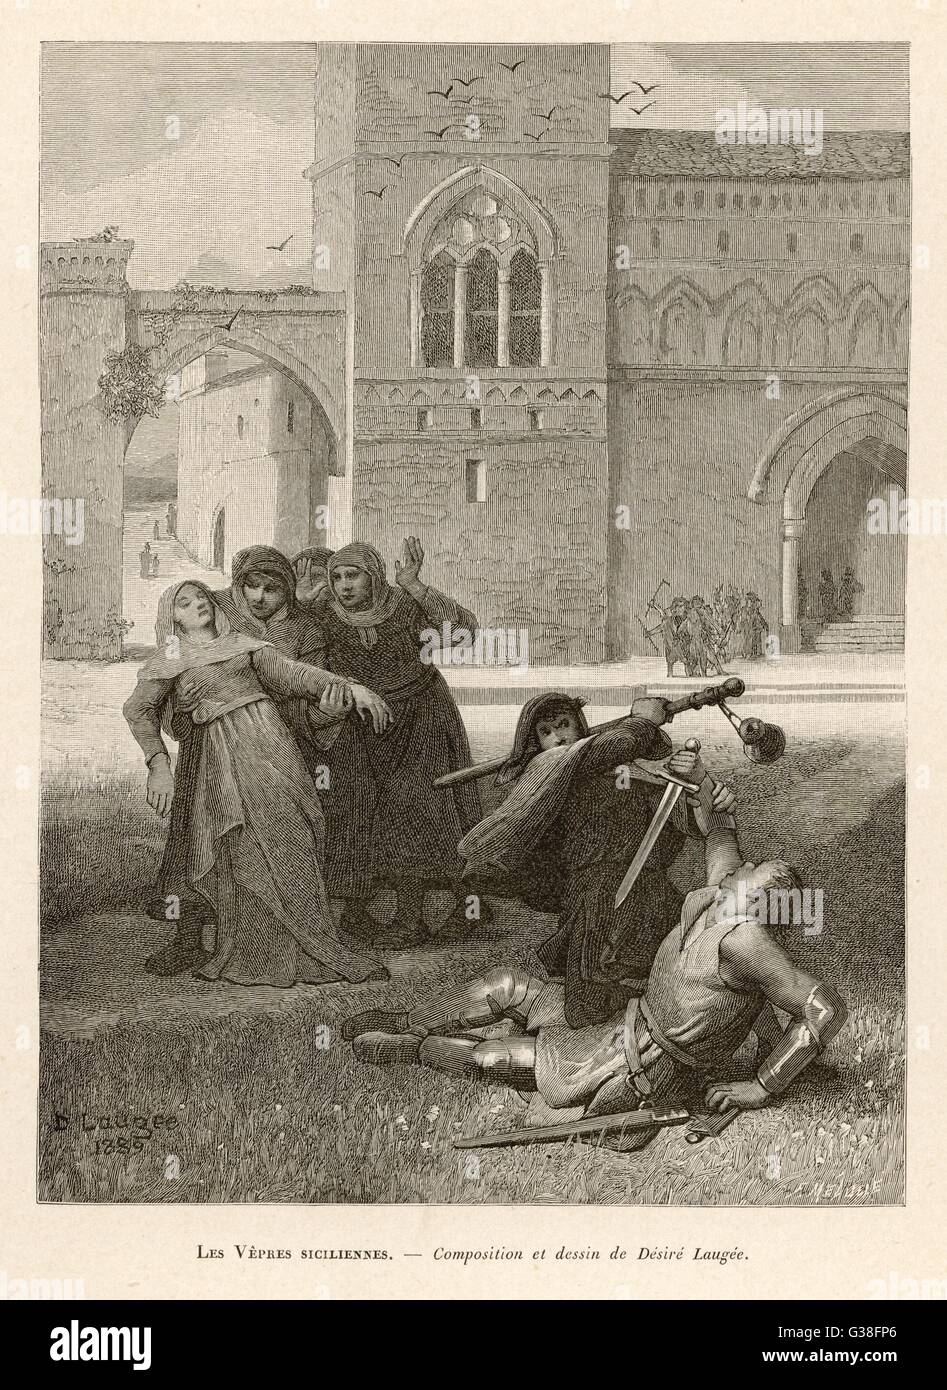 SICILIAN VESPERS The French at the court of  Charles d'Anjou, in Sicily,  are massacred, due to the  tyranny and brutality of the  French     Date: 30 March 1282 Stock Photo